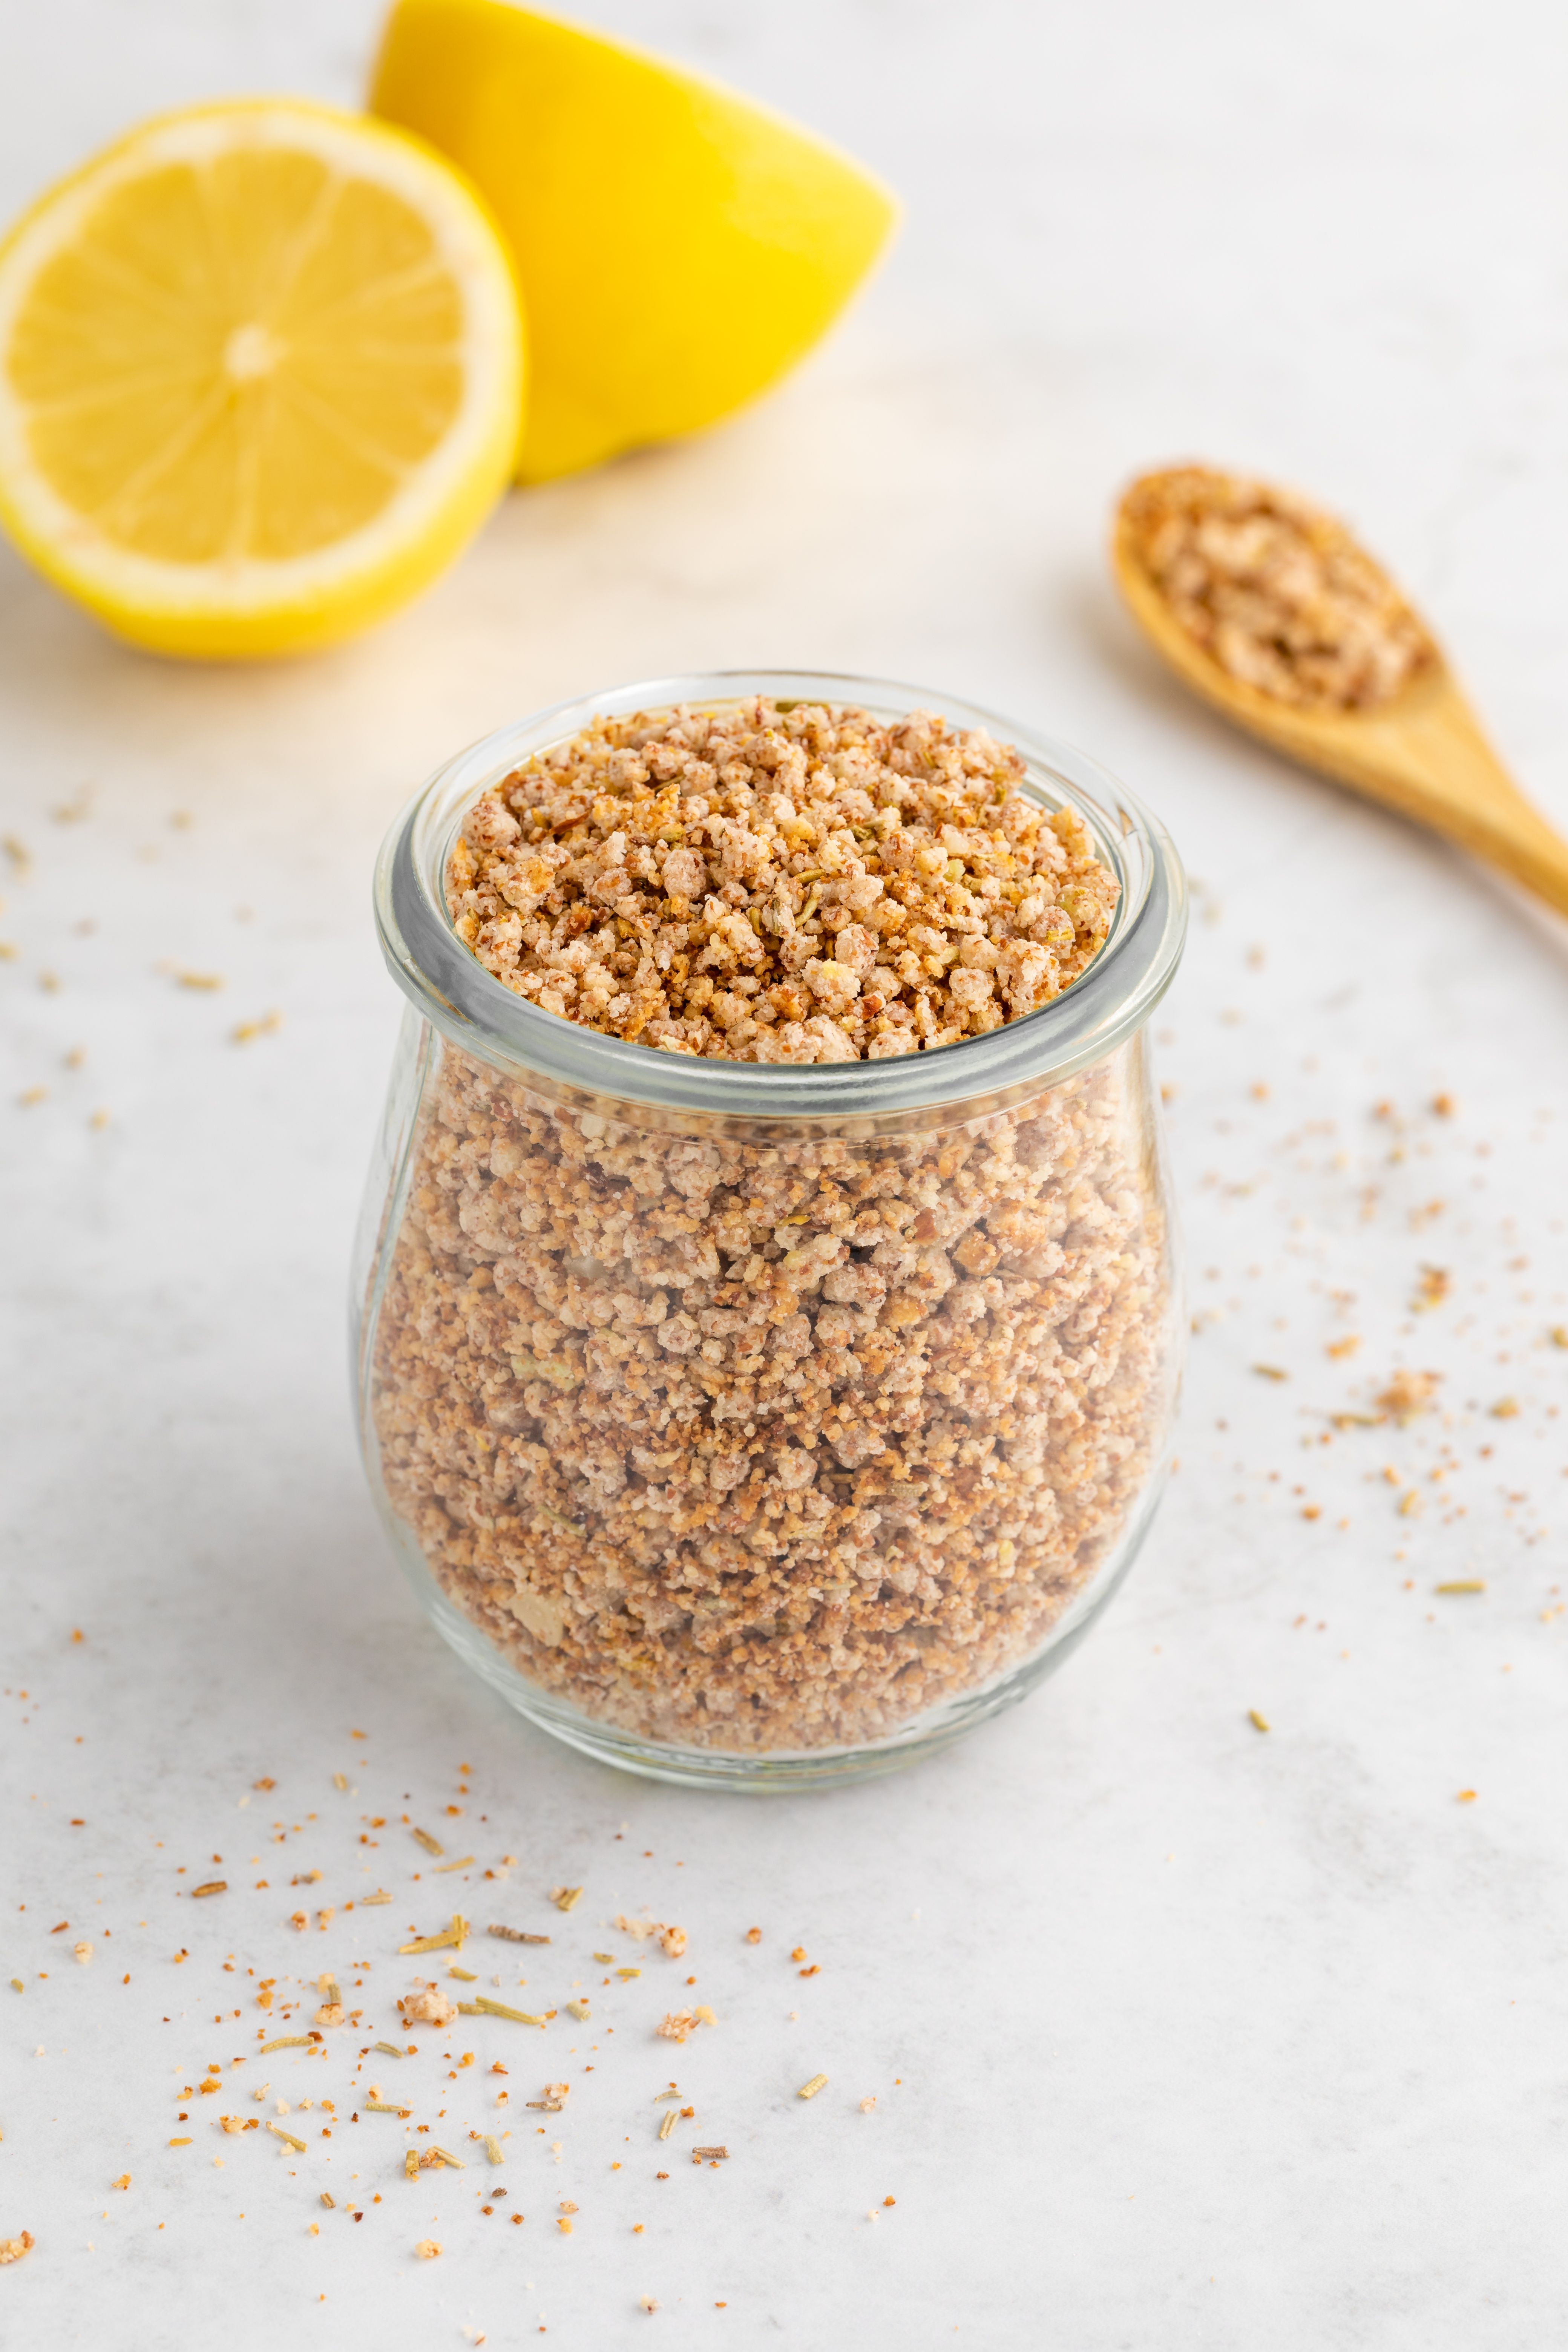 Lemon Rosemary Almond Pulp Breadcrumbs made with leftover almond pulp from your Almond Cow